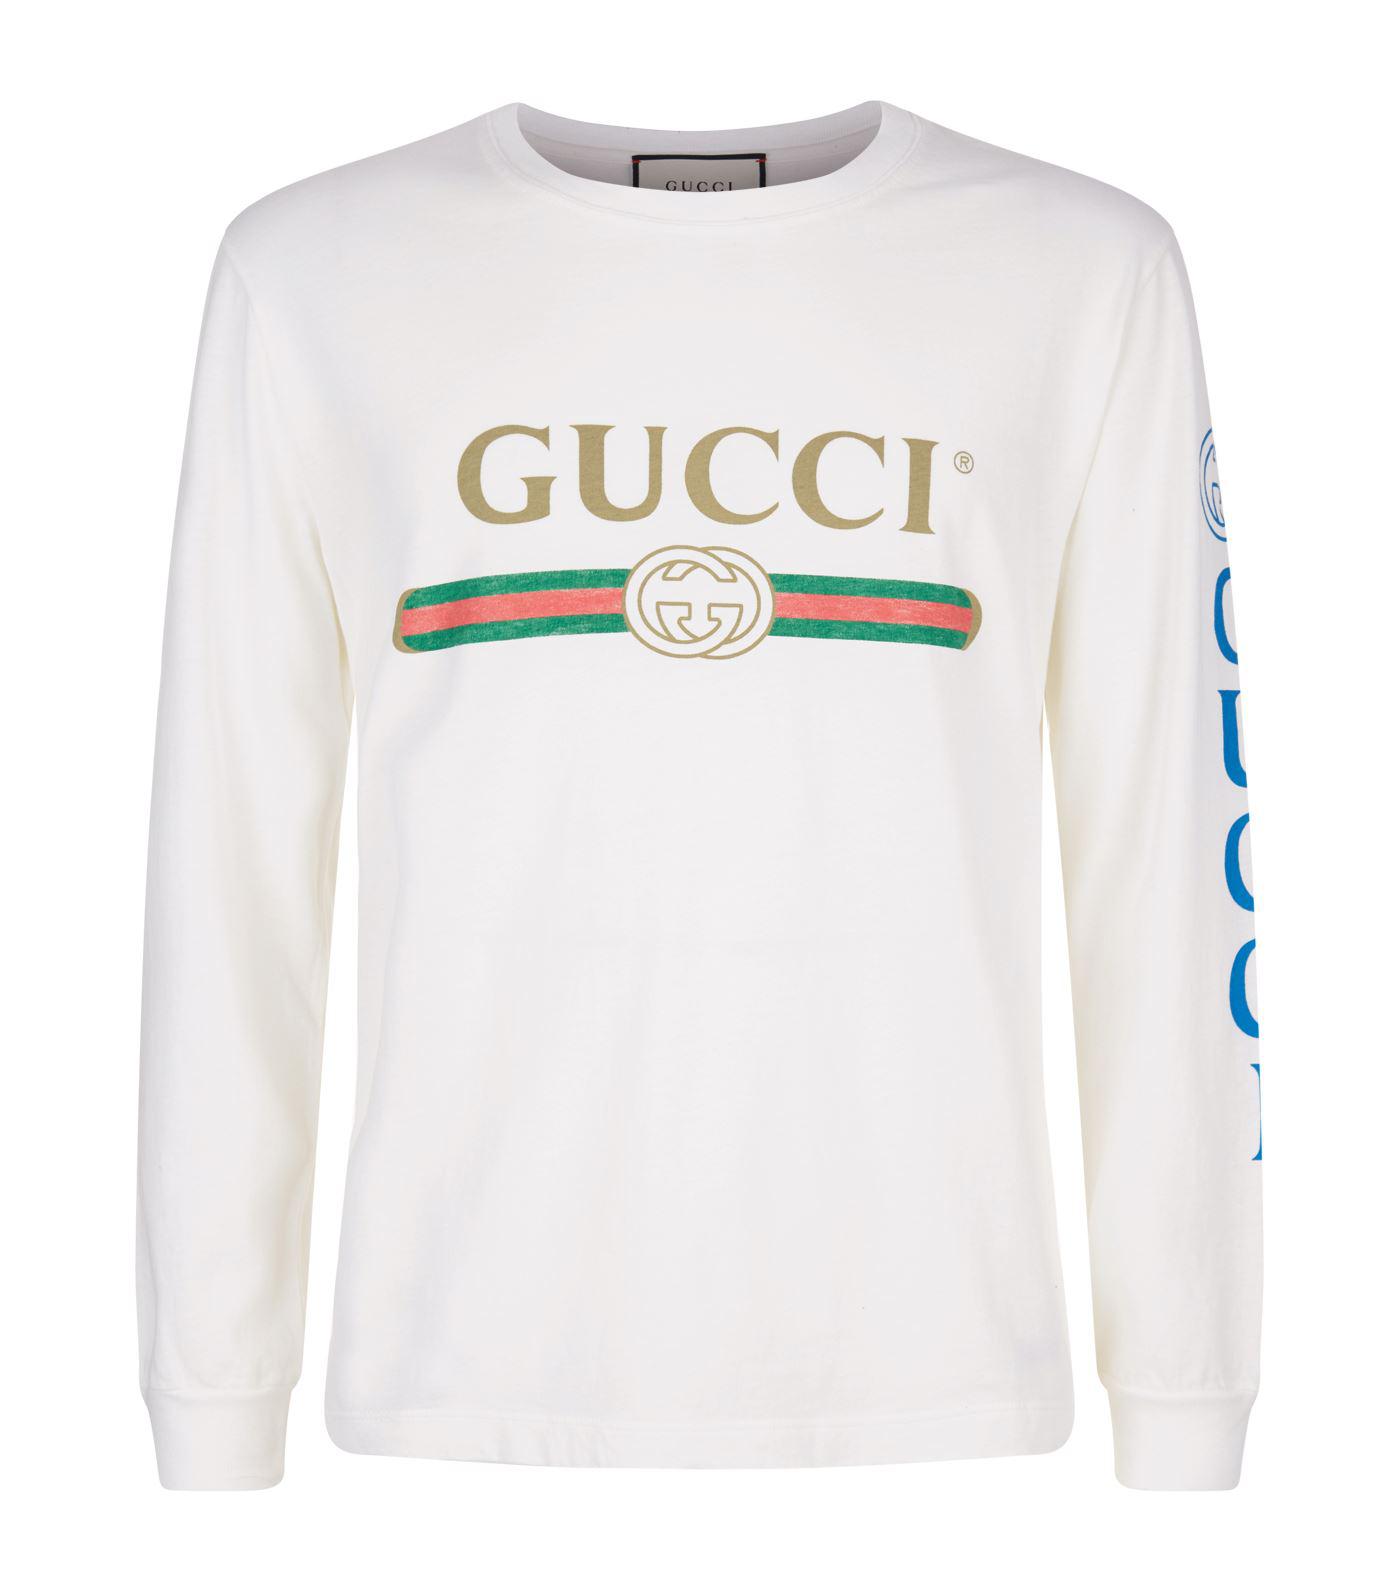 black long sleeve gucci shirt,Save up to 18%,www.ilcascinone.com